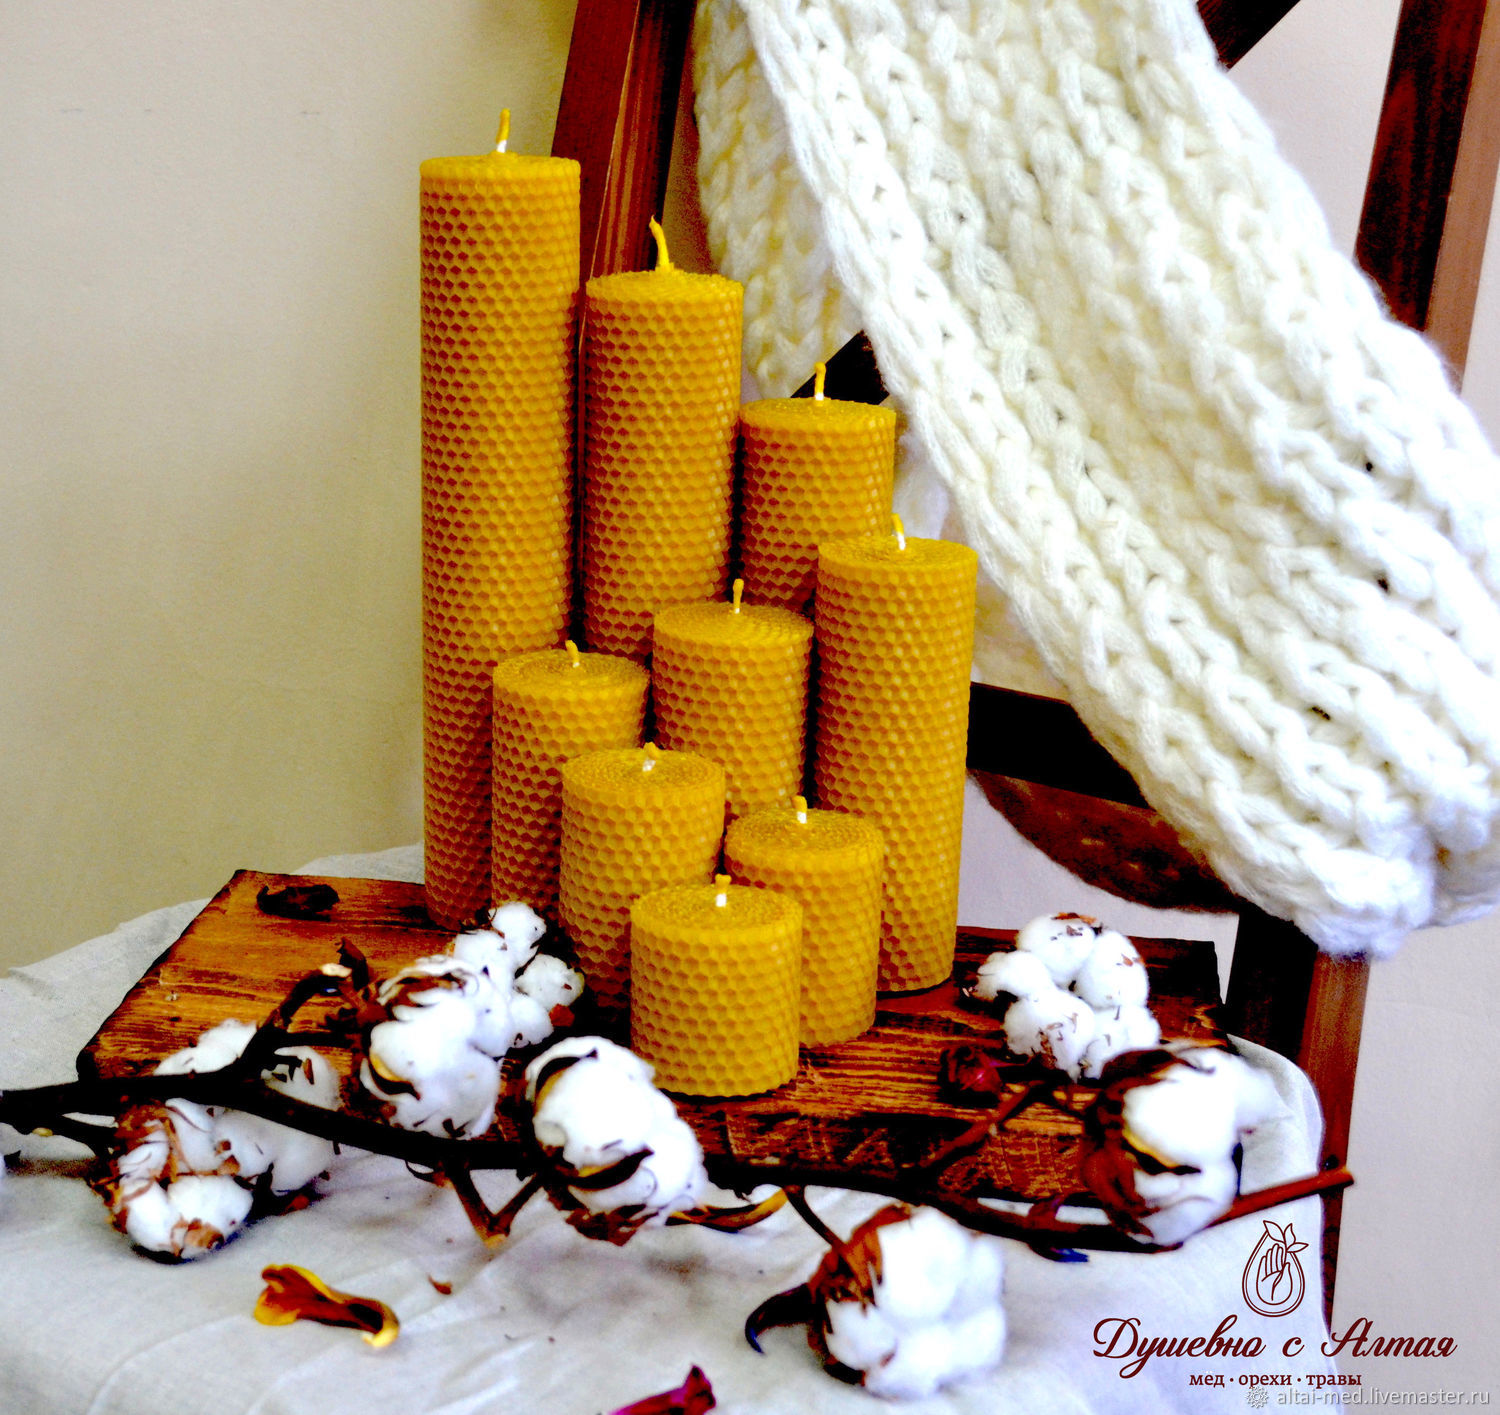 Learn more about the collection and making of beeswax candles